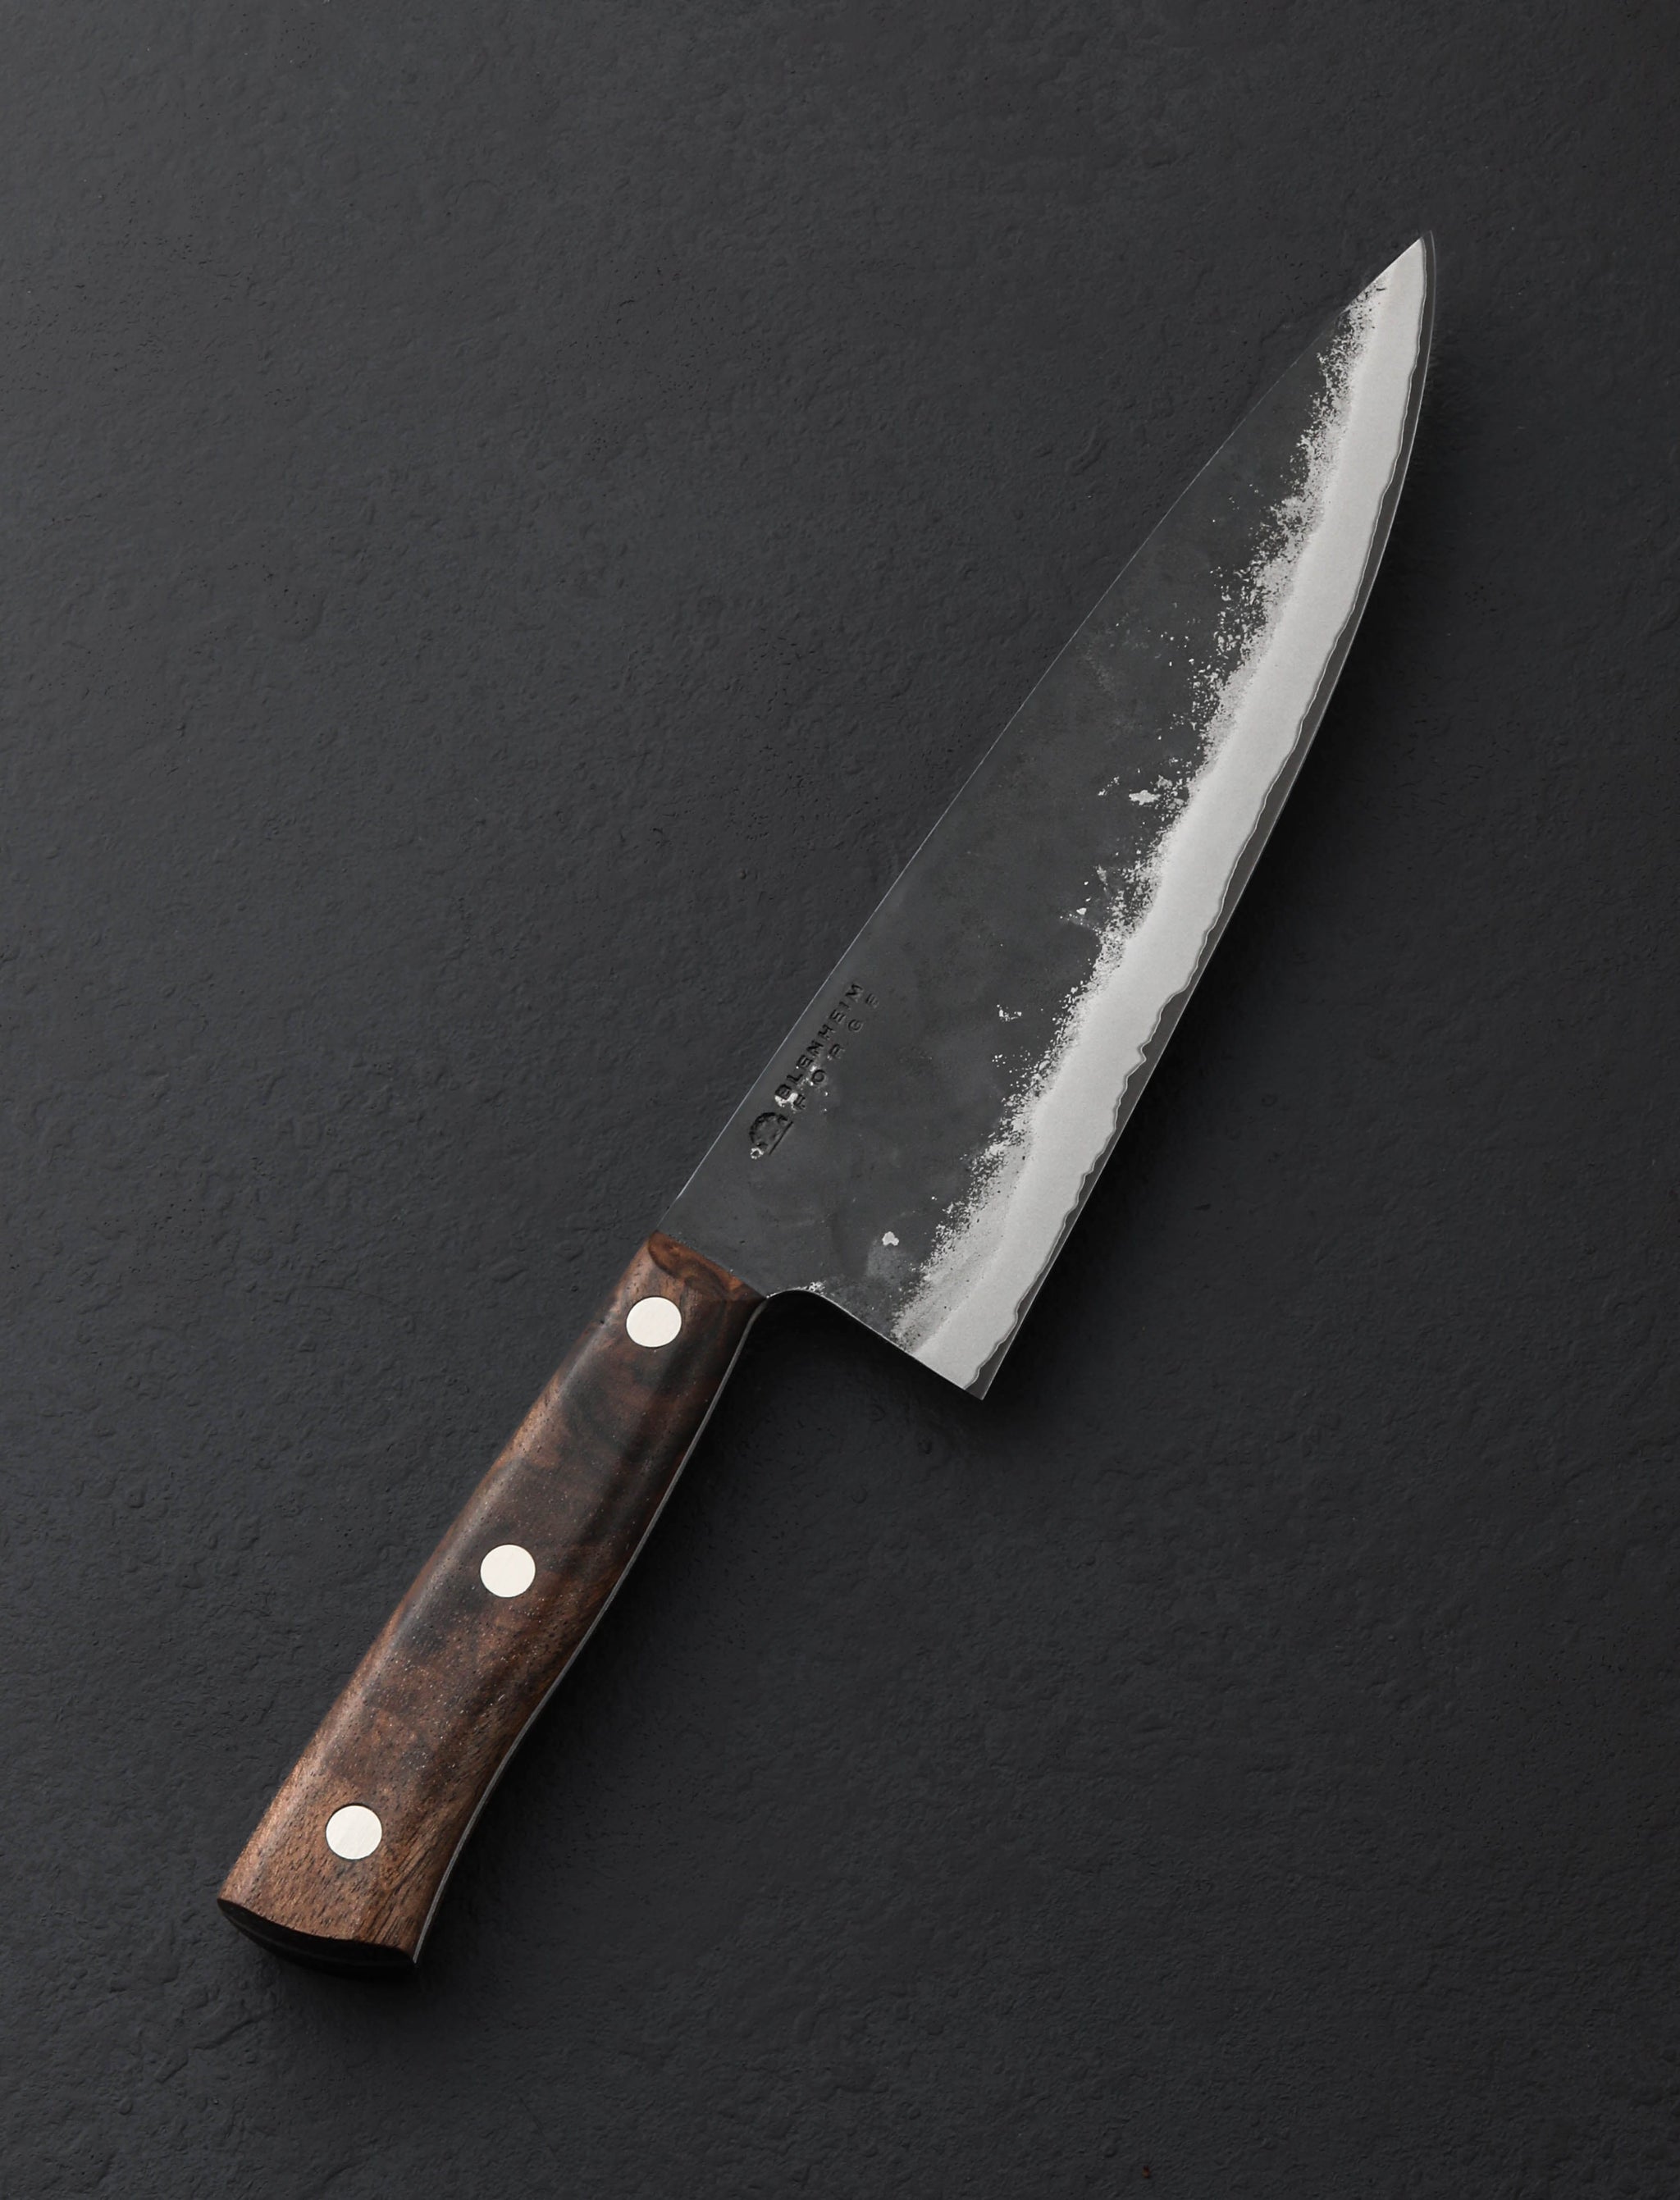 Blenheim Forge a cut above after near-£30,000 knife sale to Gordon